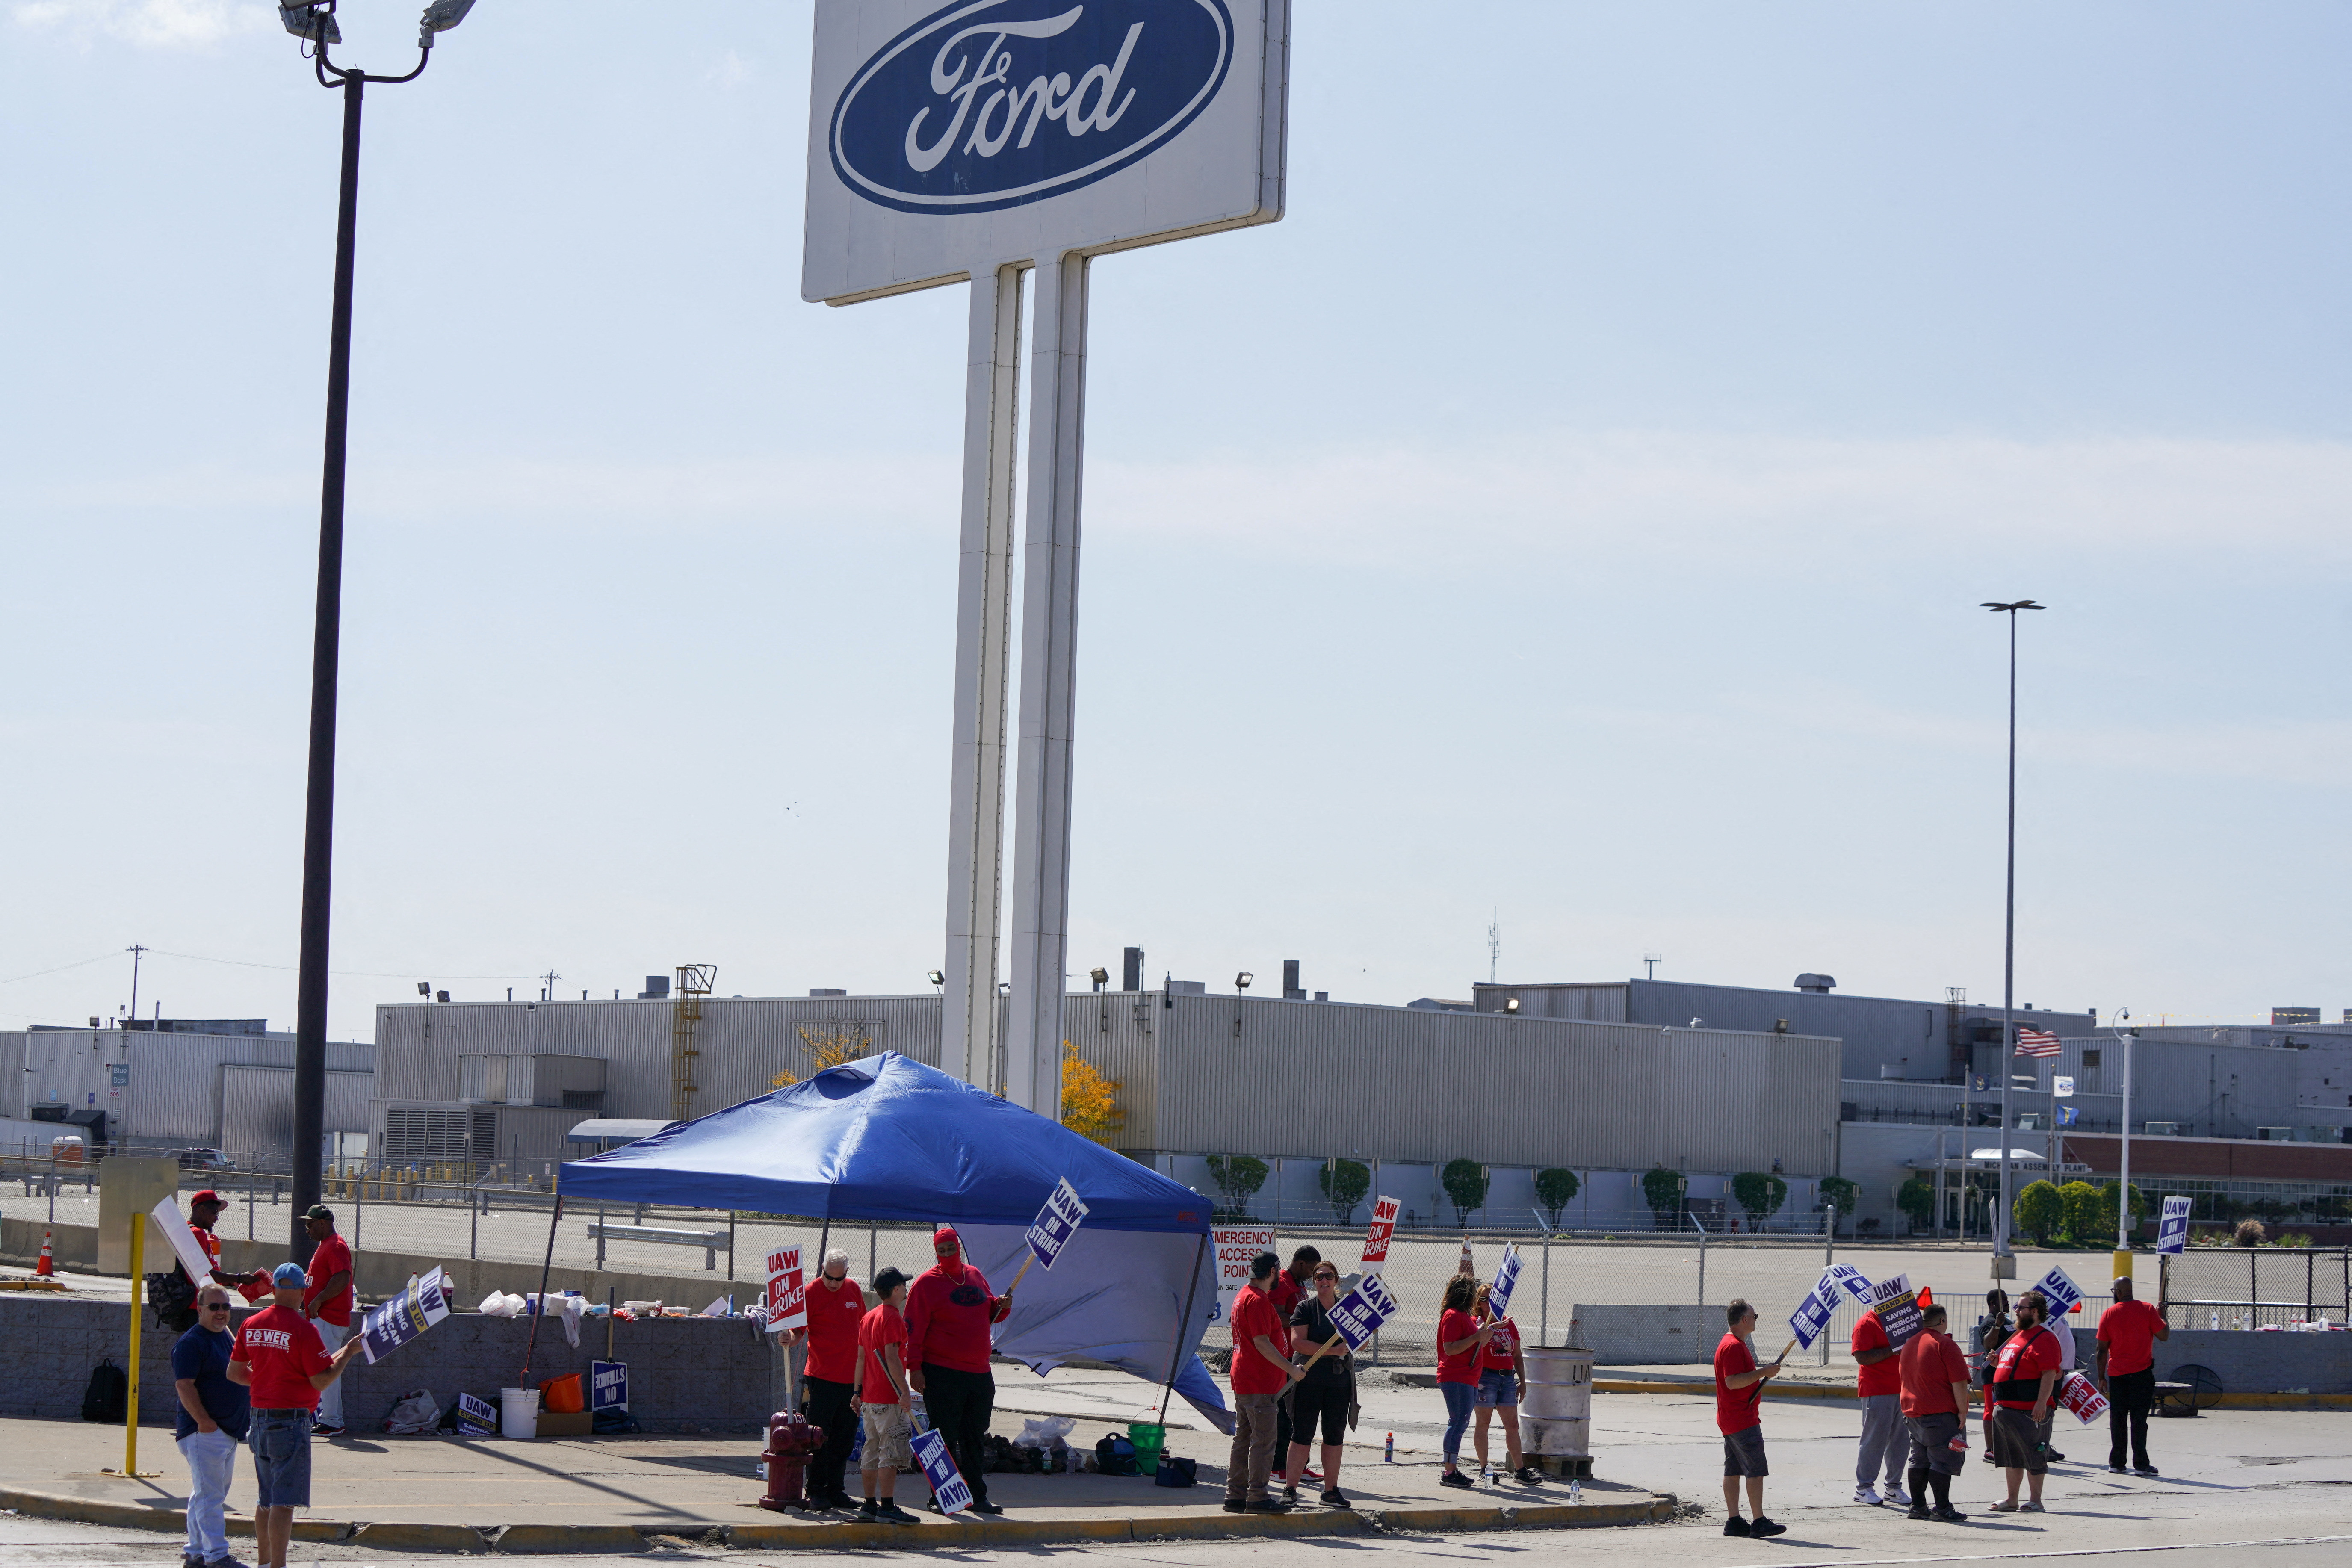 Picket of Striking United Auto Workers (UAW) outside the Ford Michigan Assembly in Wayne